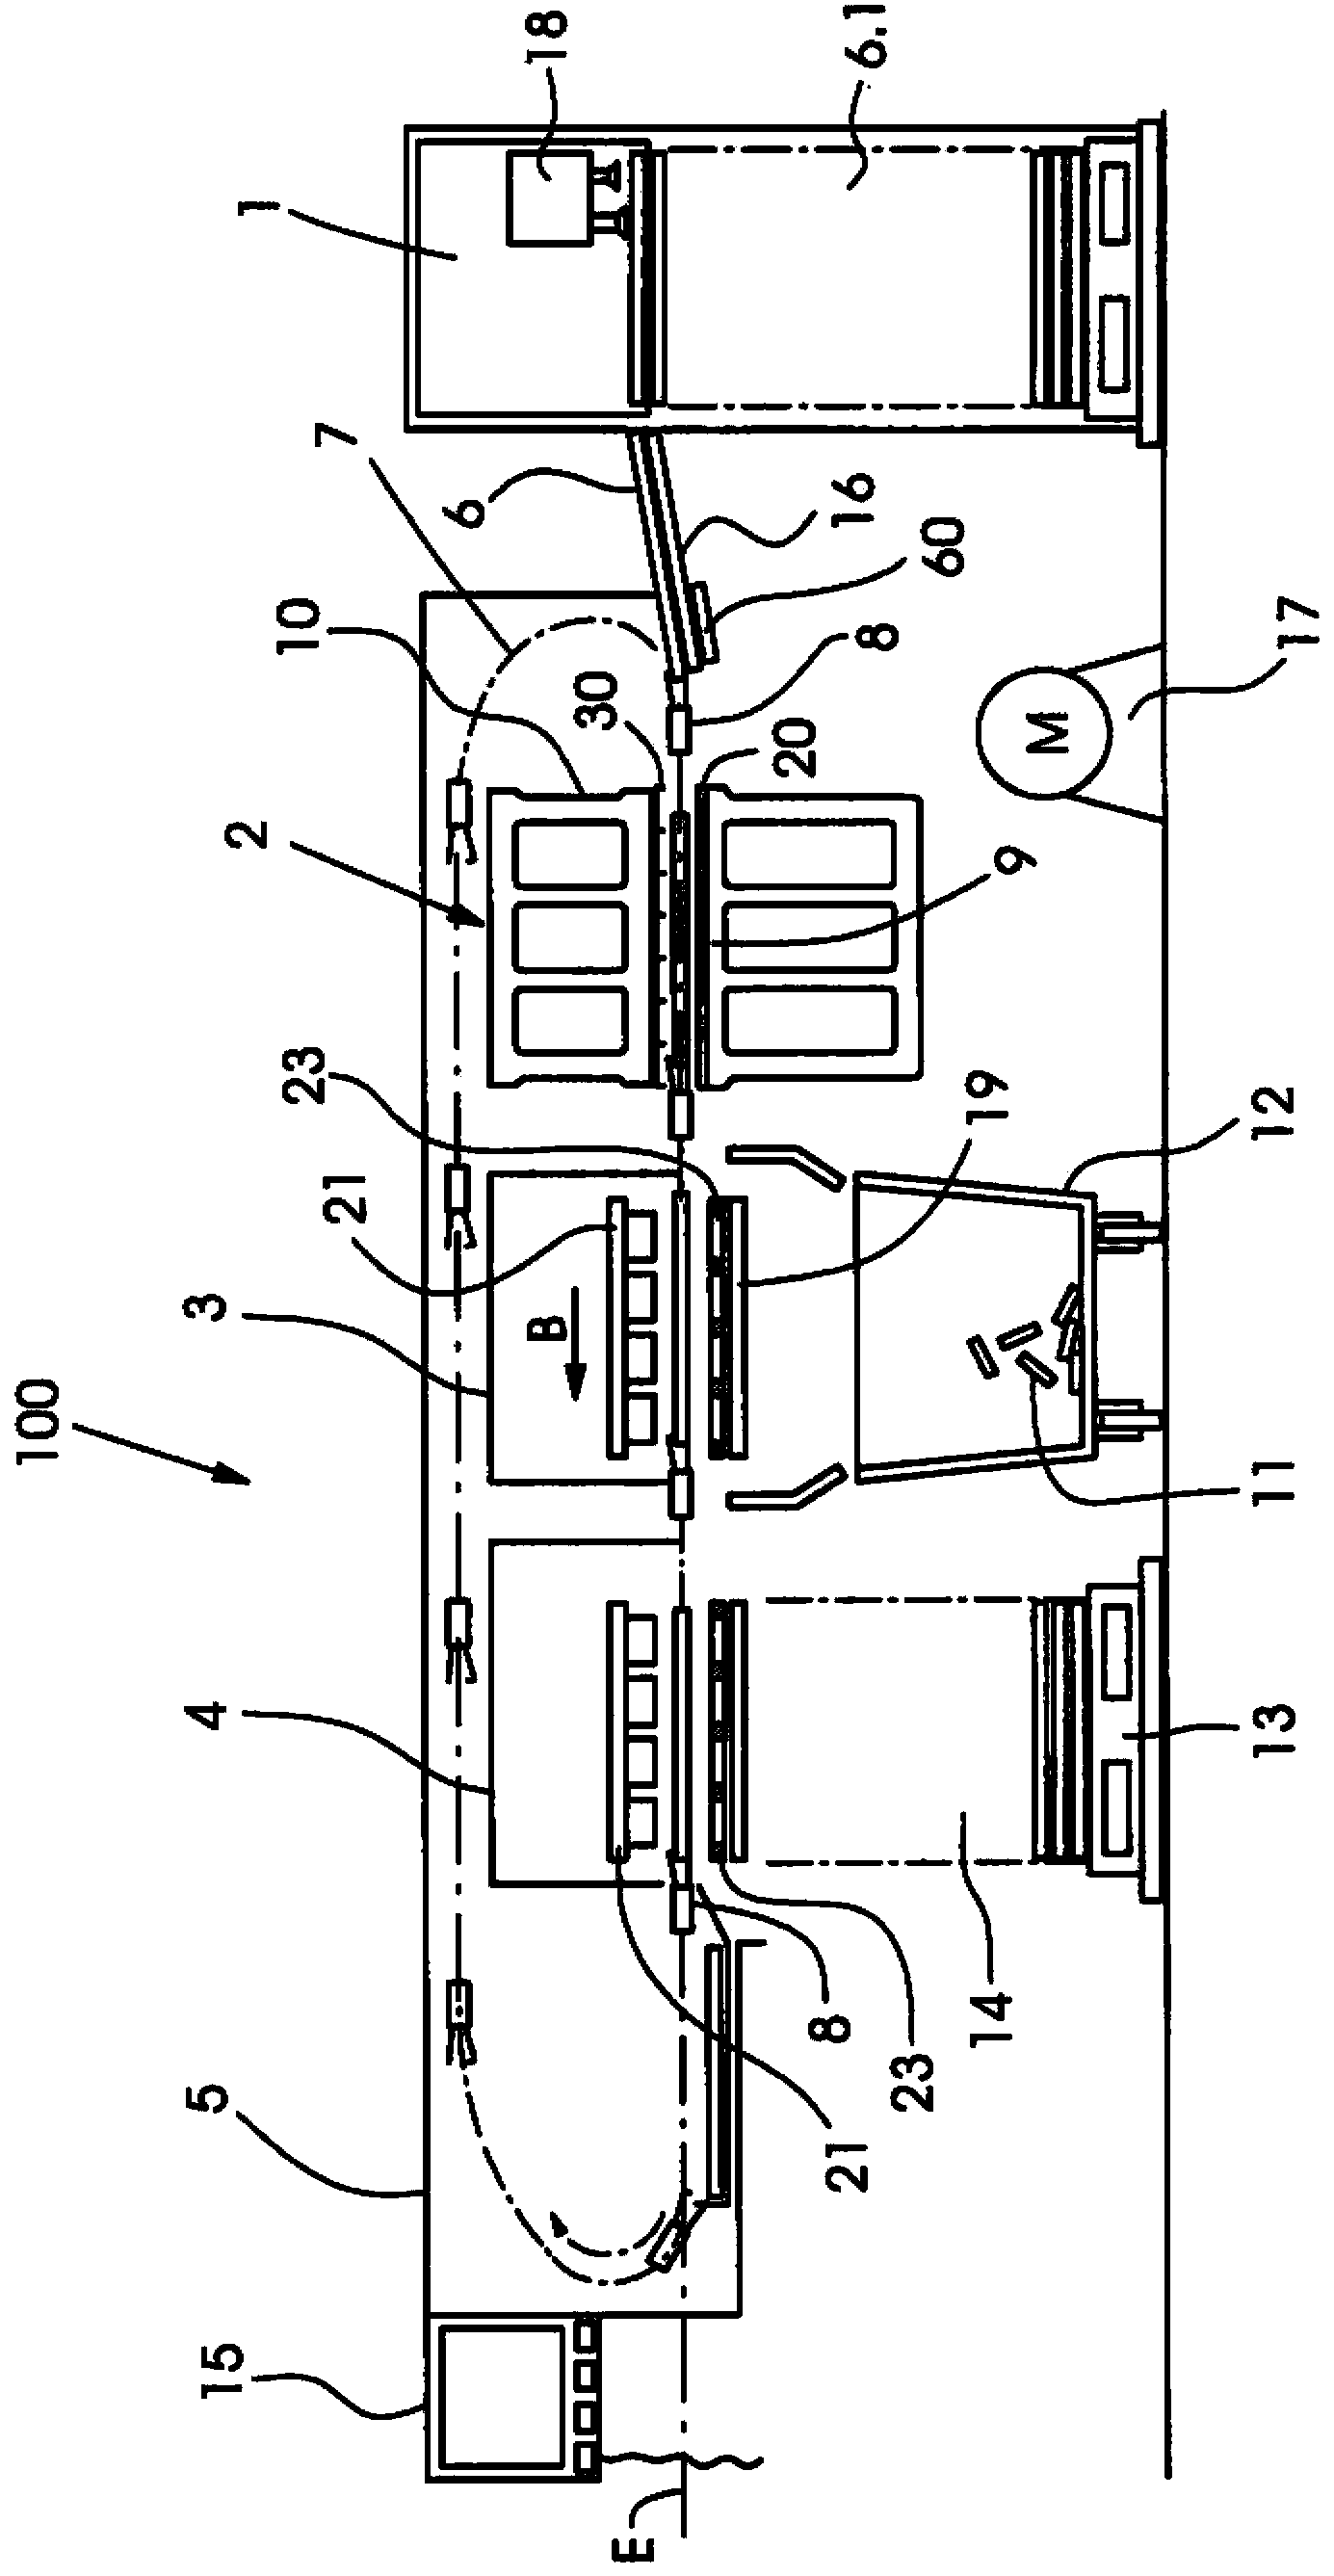 Device for aligning sheets with articulated arm bearing